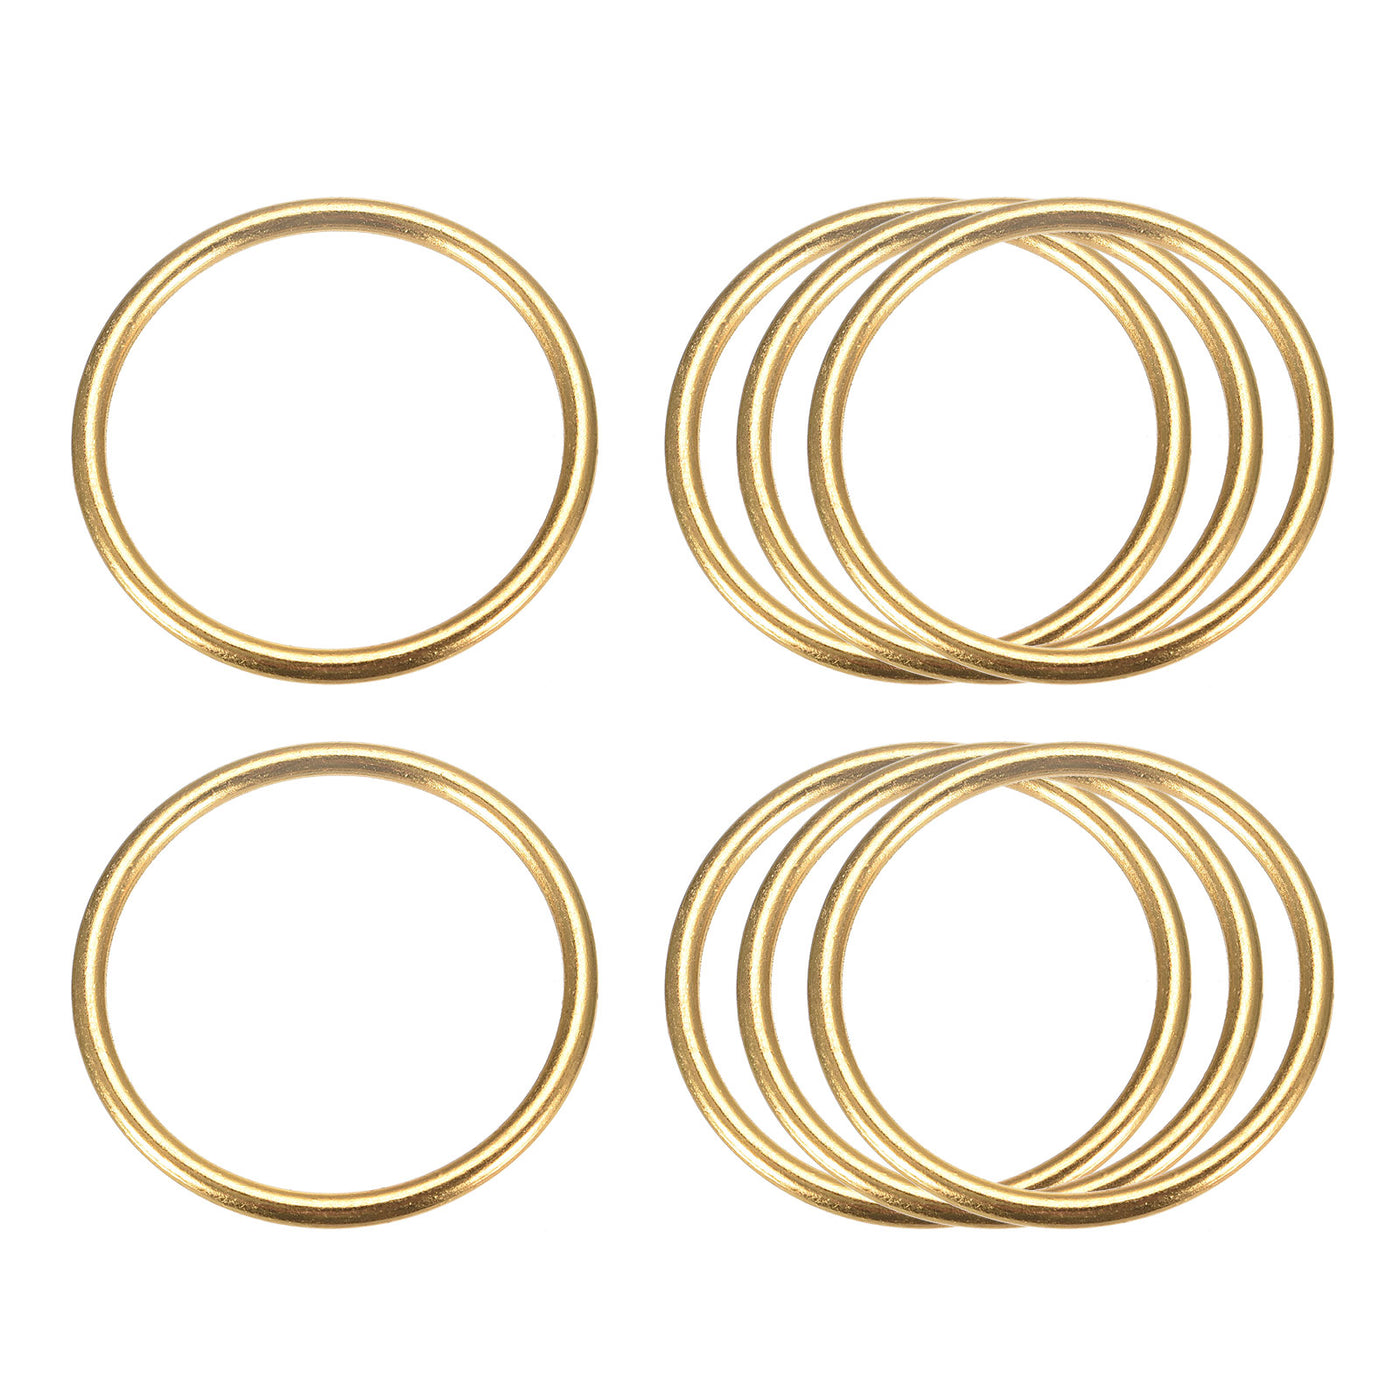 uxcell Uxcell Metal O Rings, 8pcs 40mm(1.57") ID 3mm Thick Welded O-Ringe, Gold Tone